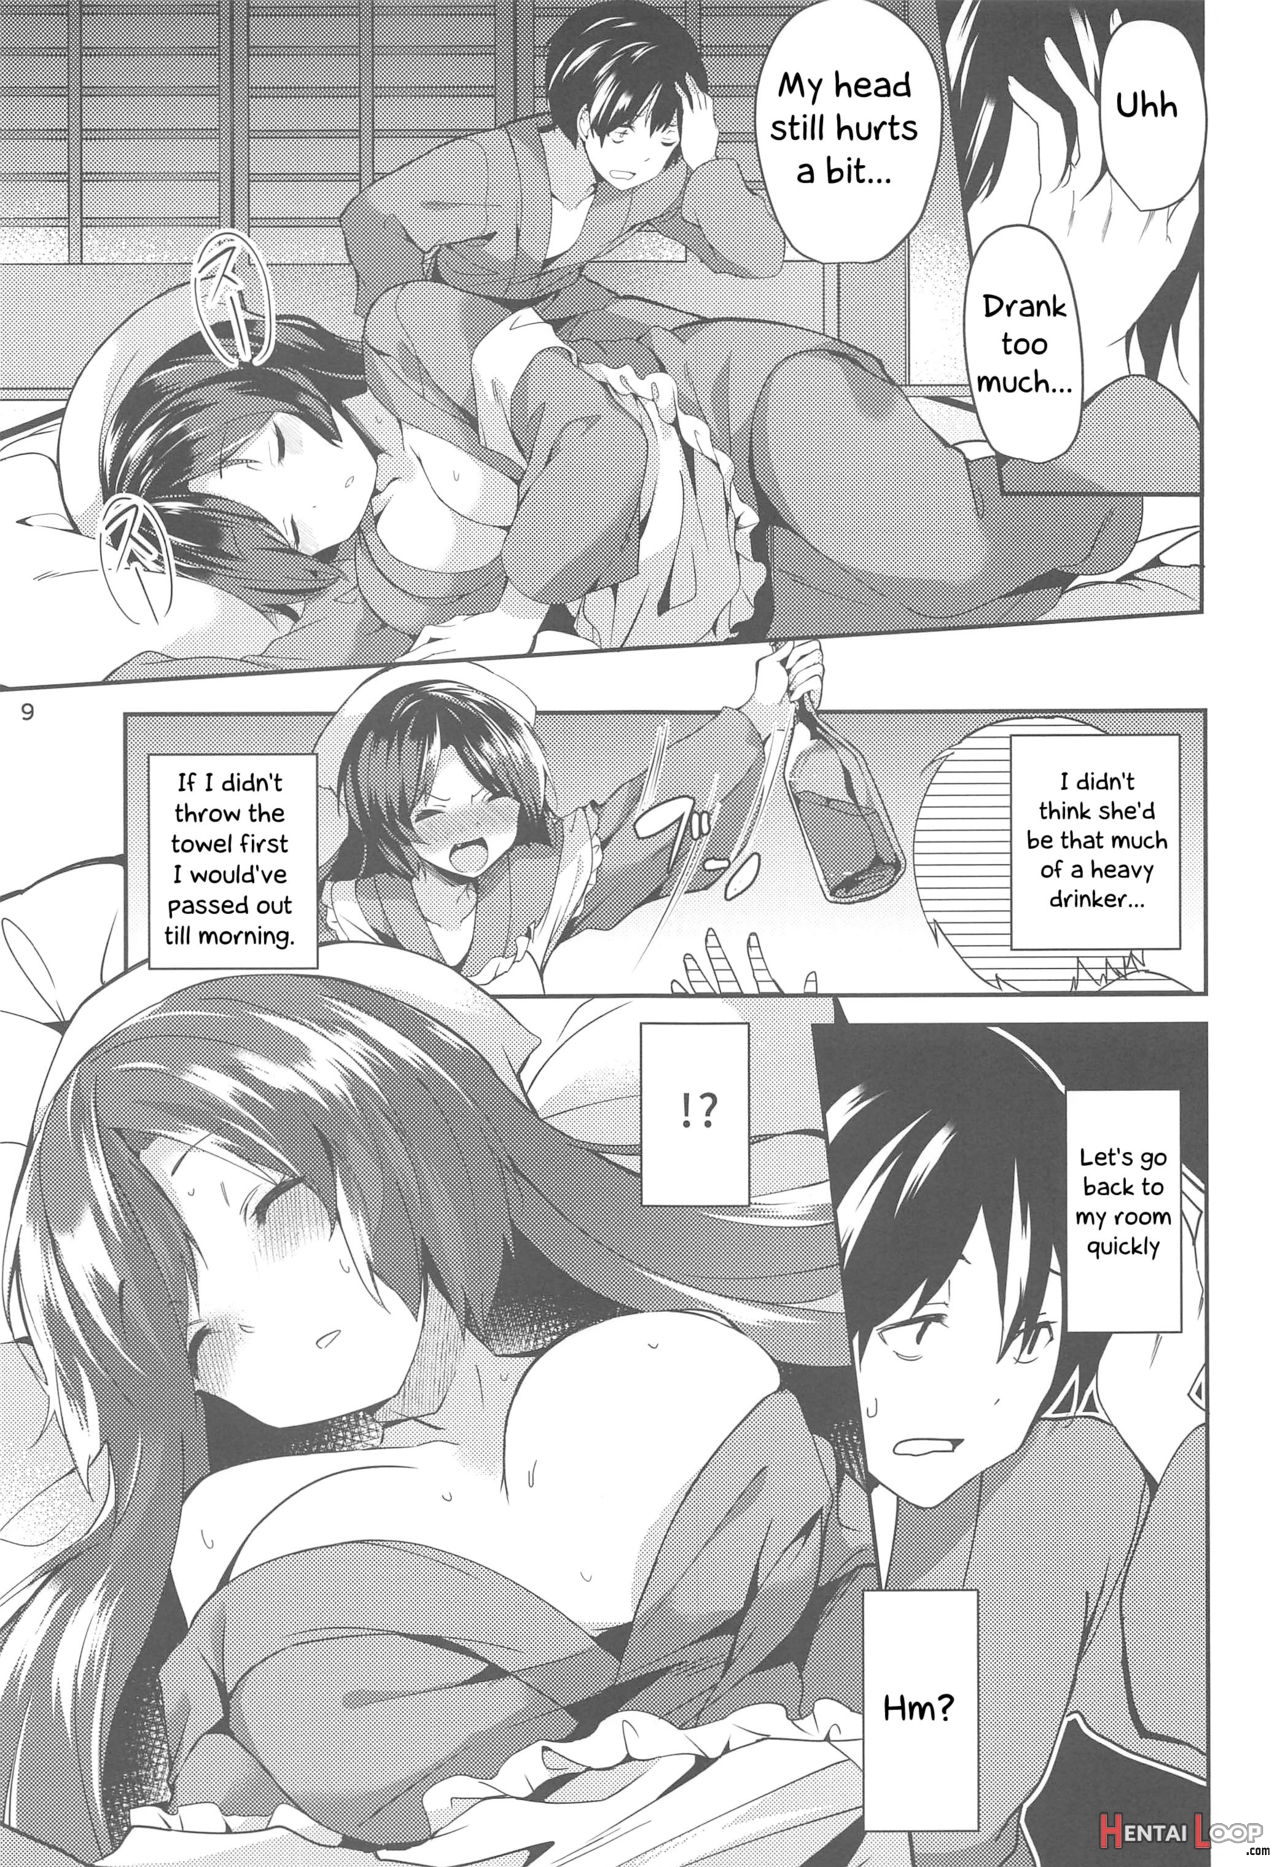 Kagerou's Human Exposure Record page 8